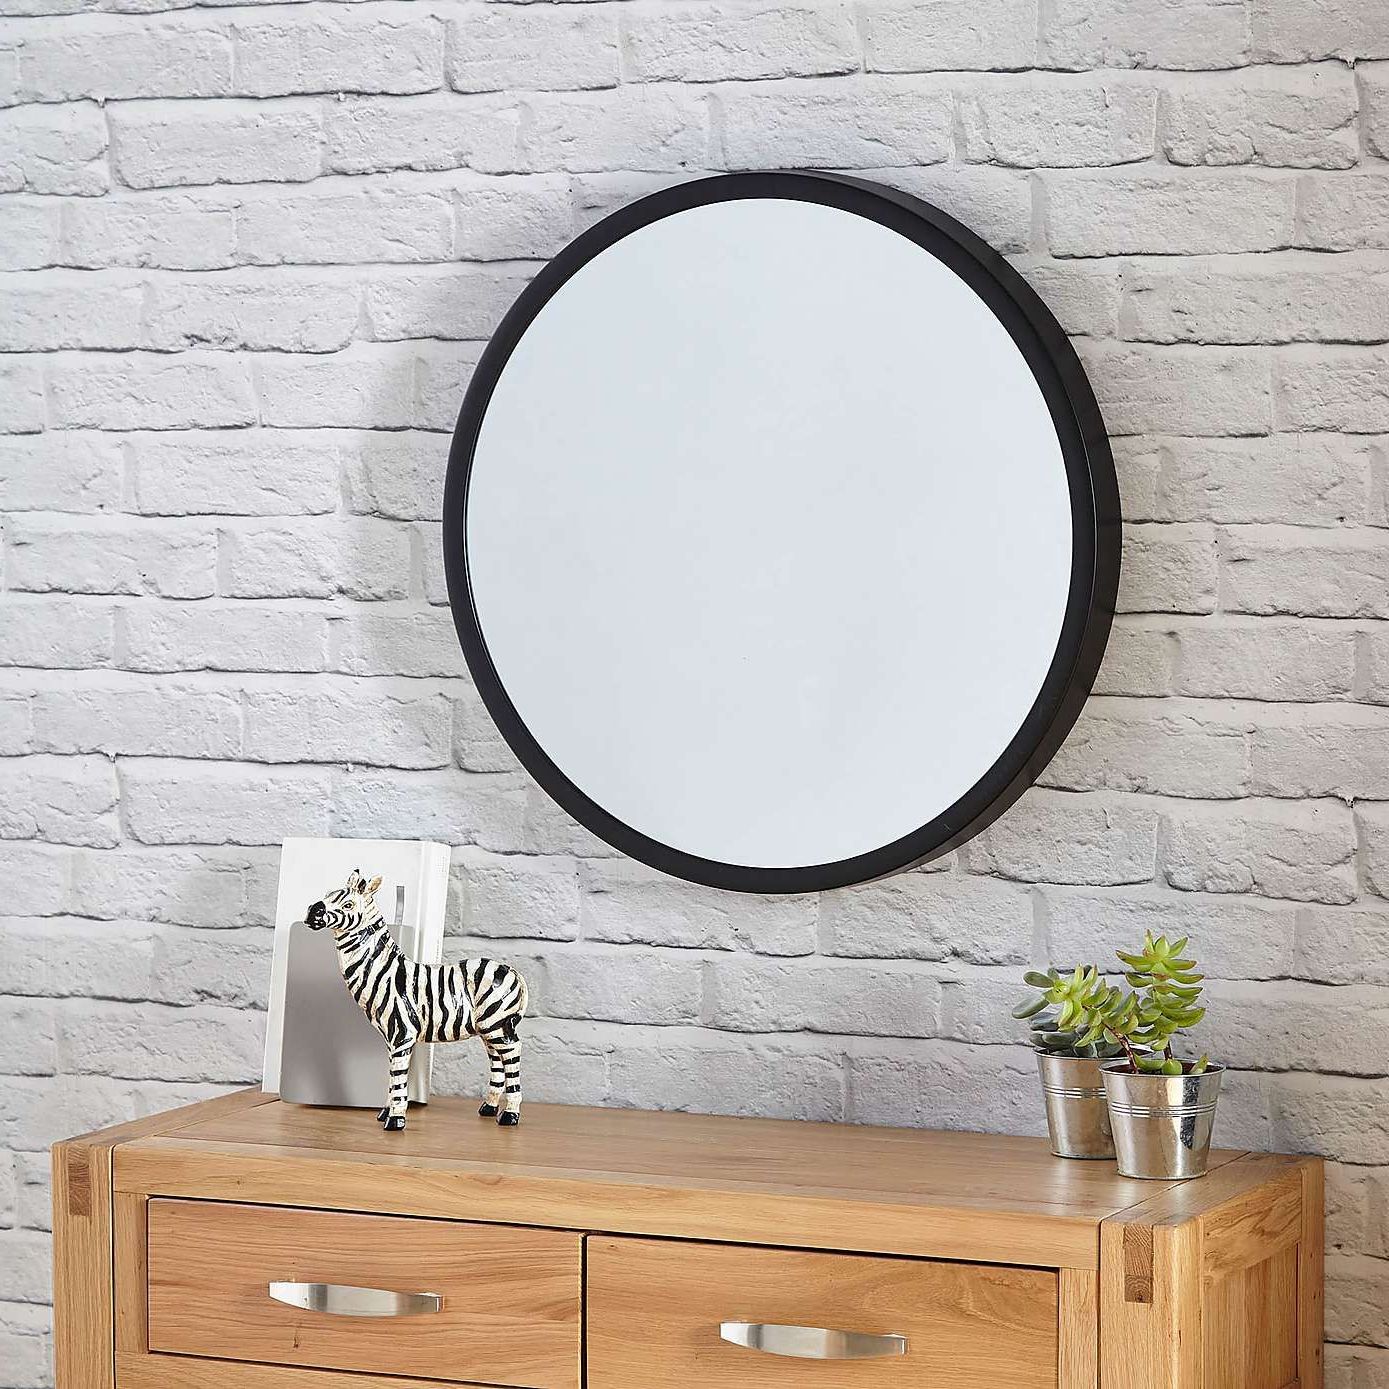 Newest Round Grid Wall Mirrors Intended For Elements Round Wall Mirror 55cm Black (View 6 of 15)